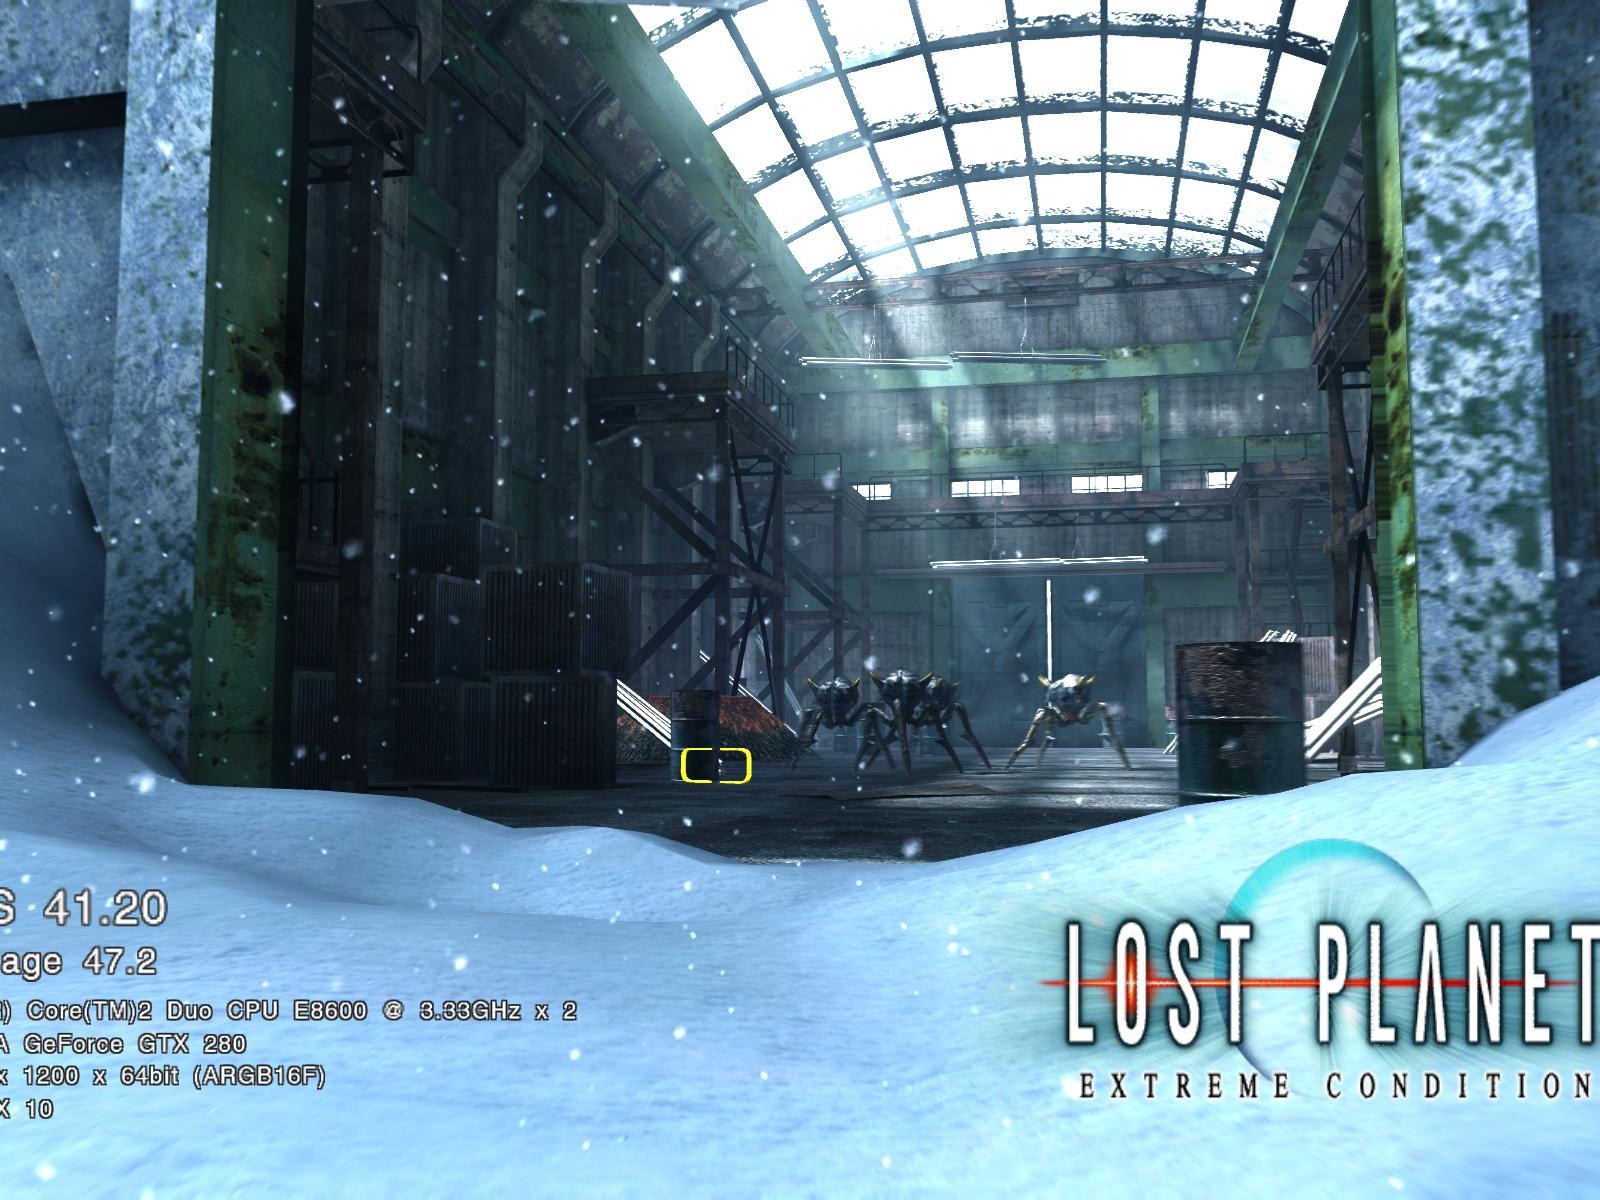 Lost Planet: Extreme Condition HD tapety na plochu #12 - 1600x1200